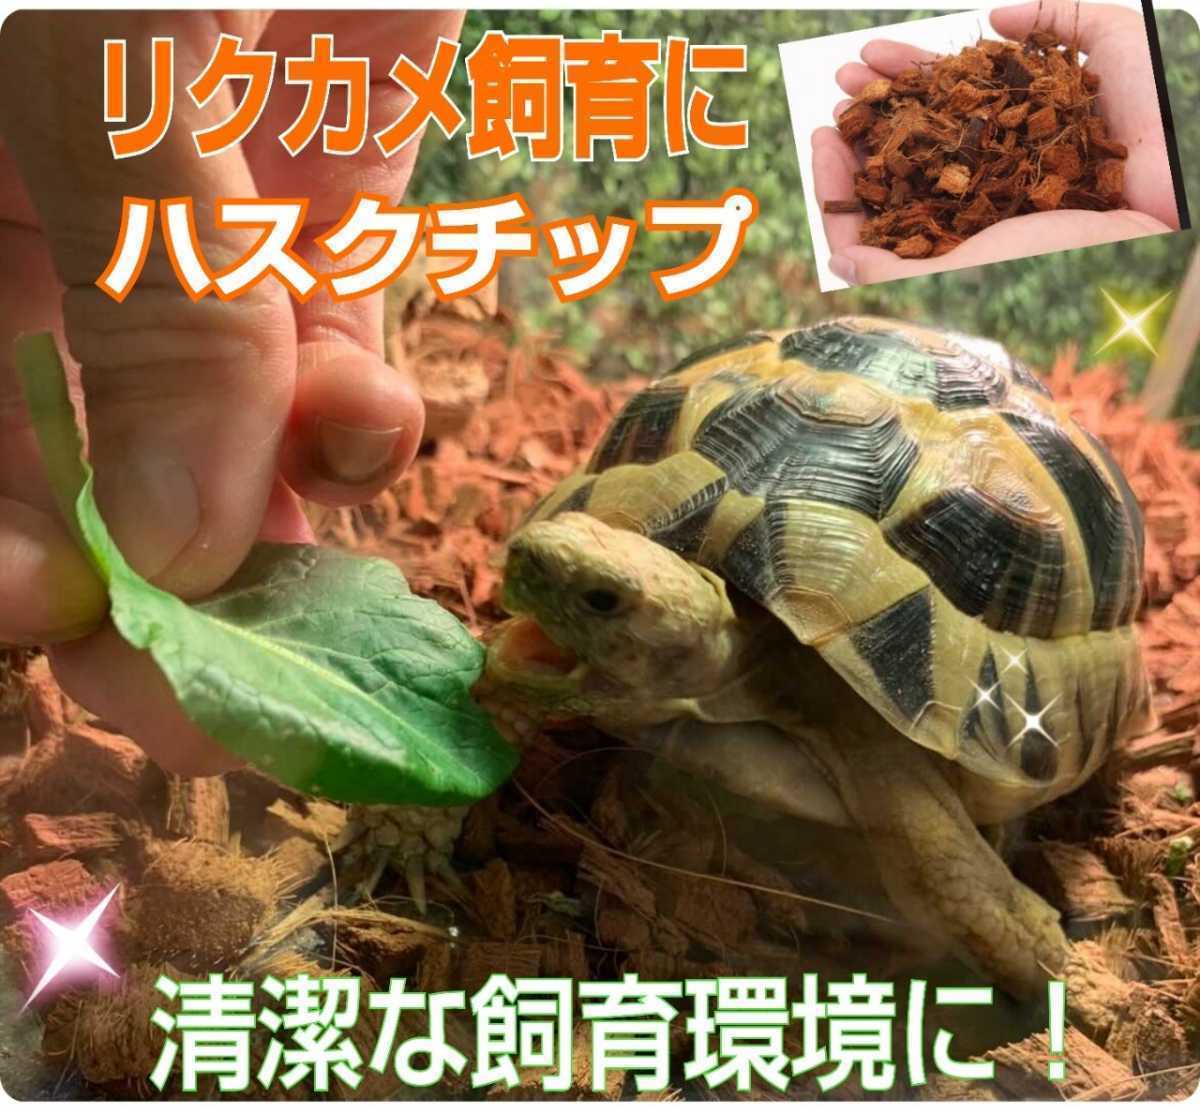  turtle. breeding flooring is kore. most! good quality Husq chip 5 liter sack * carefuly selected good quality . natural material 100% ventilation * guarantee aqueous . excel clean . environment . making. *